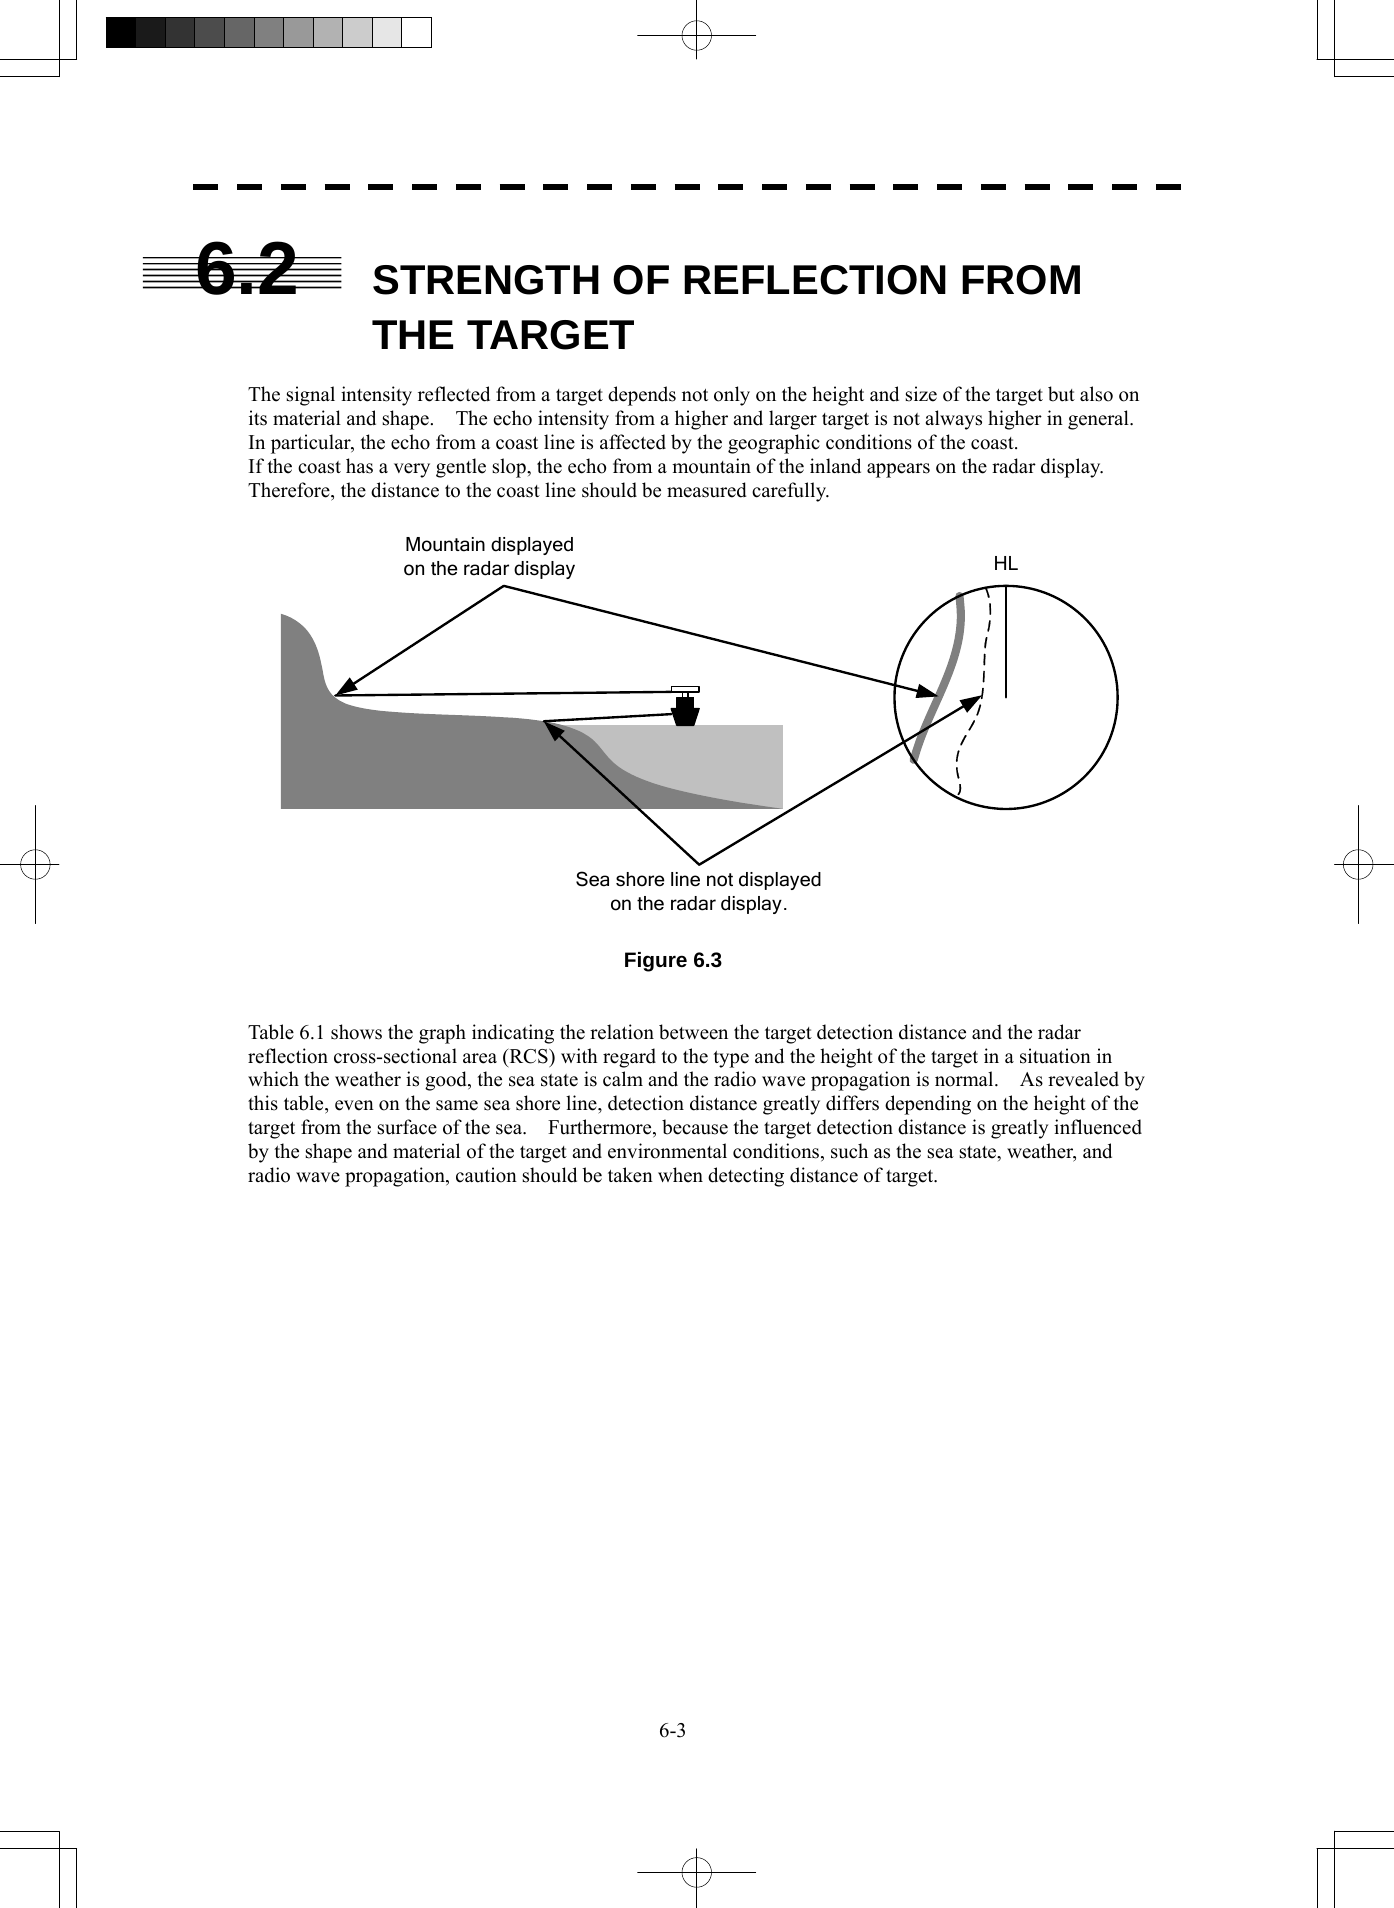  6-3 6.2  STRENGTH OF REFLECTION FROM THE TARGET  The signal intensity reflected from a target depends not only on the height and size of the target but also on its material and shape.    The echo intensity from a higher and larger target is not always higher in general. In particular, the echo from a coast line is affected by the geographic conditions of the coast. If the coast has a very gentle slop, the echo from a mountain of the inland appears on the radar display. Therefore, the distance to the coast line should be measured carefully.  Mountain displayedon the radar displaySea shore line not displayedon the radar display.HL  Figure 6.3   Table 6.1 shows the graph indicating the relation between the target detection distance and the radar reflection cross-sectional area (RCS) with regard to the type and the height of the target in a situation in which the weather is good, the sea state is calm and the radio wave propagation is normal.    As revealed by this table, even on the same sea shore line, detection distance greatly differs depending on the height of the target from the surface of the sea.    Furthermore, because the target detection distance is greatly influenced by the shape and material of the target and environmental conditions, such as the sea state, weather, and radio wave propagation, caution should be taken when detecting distance of target.  